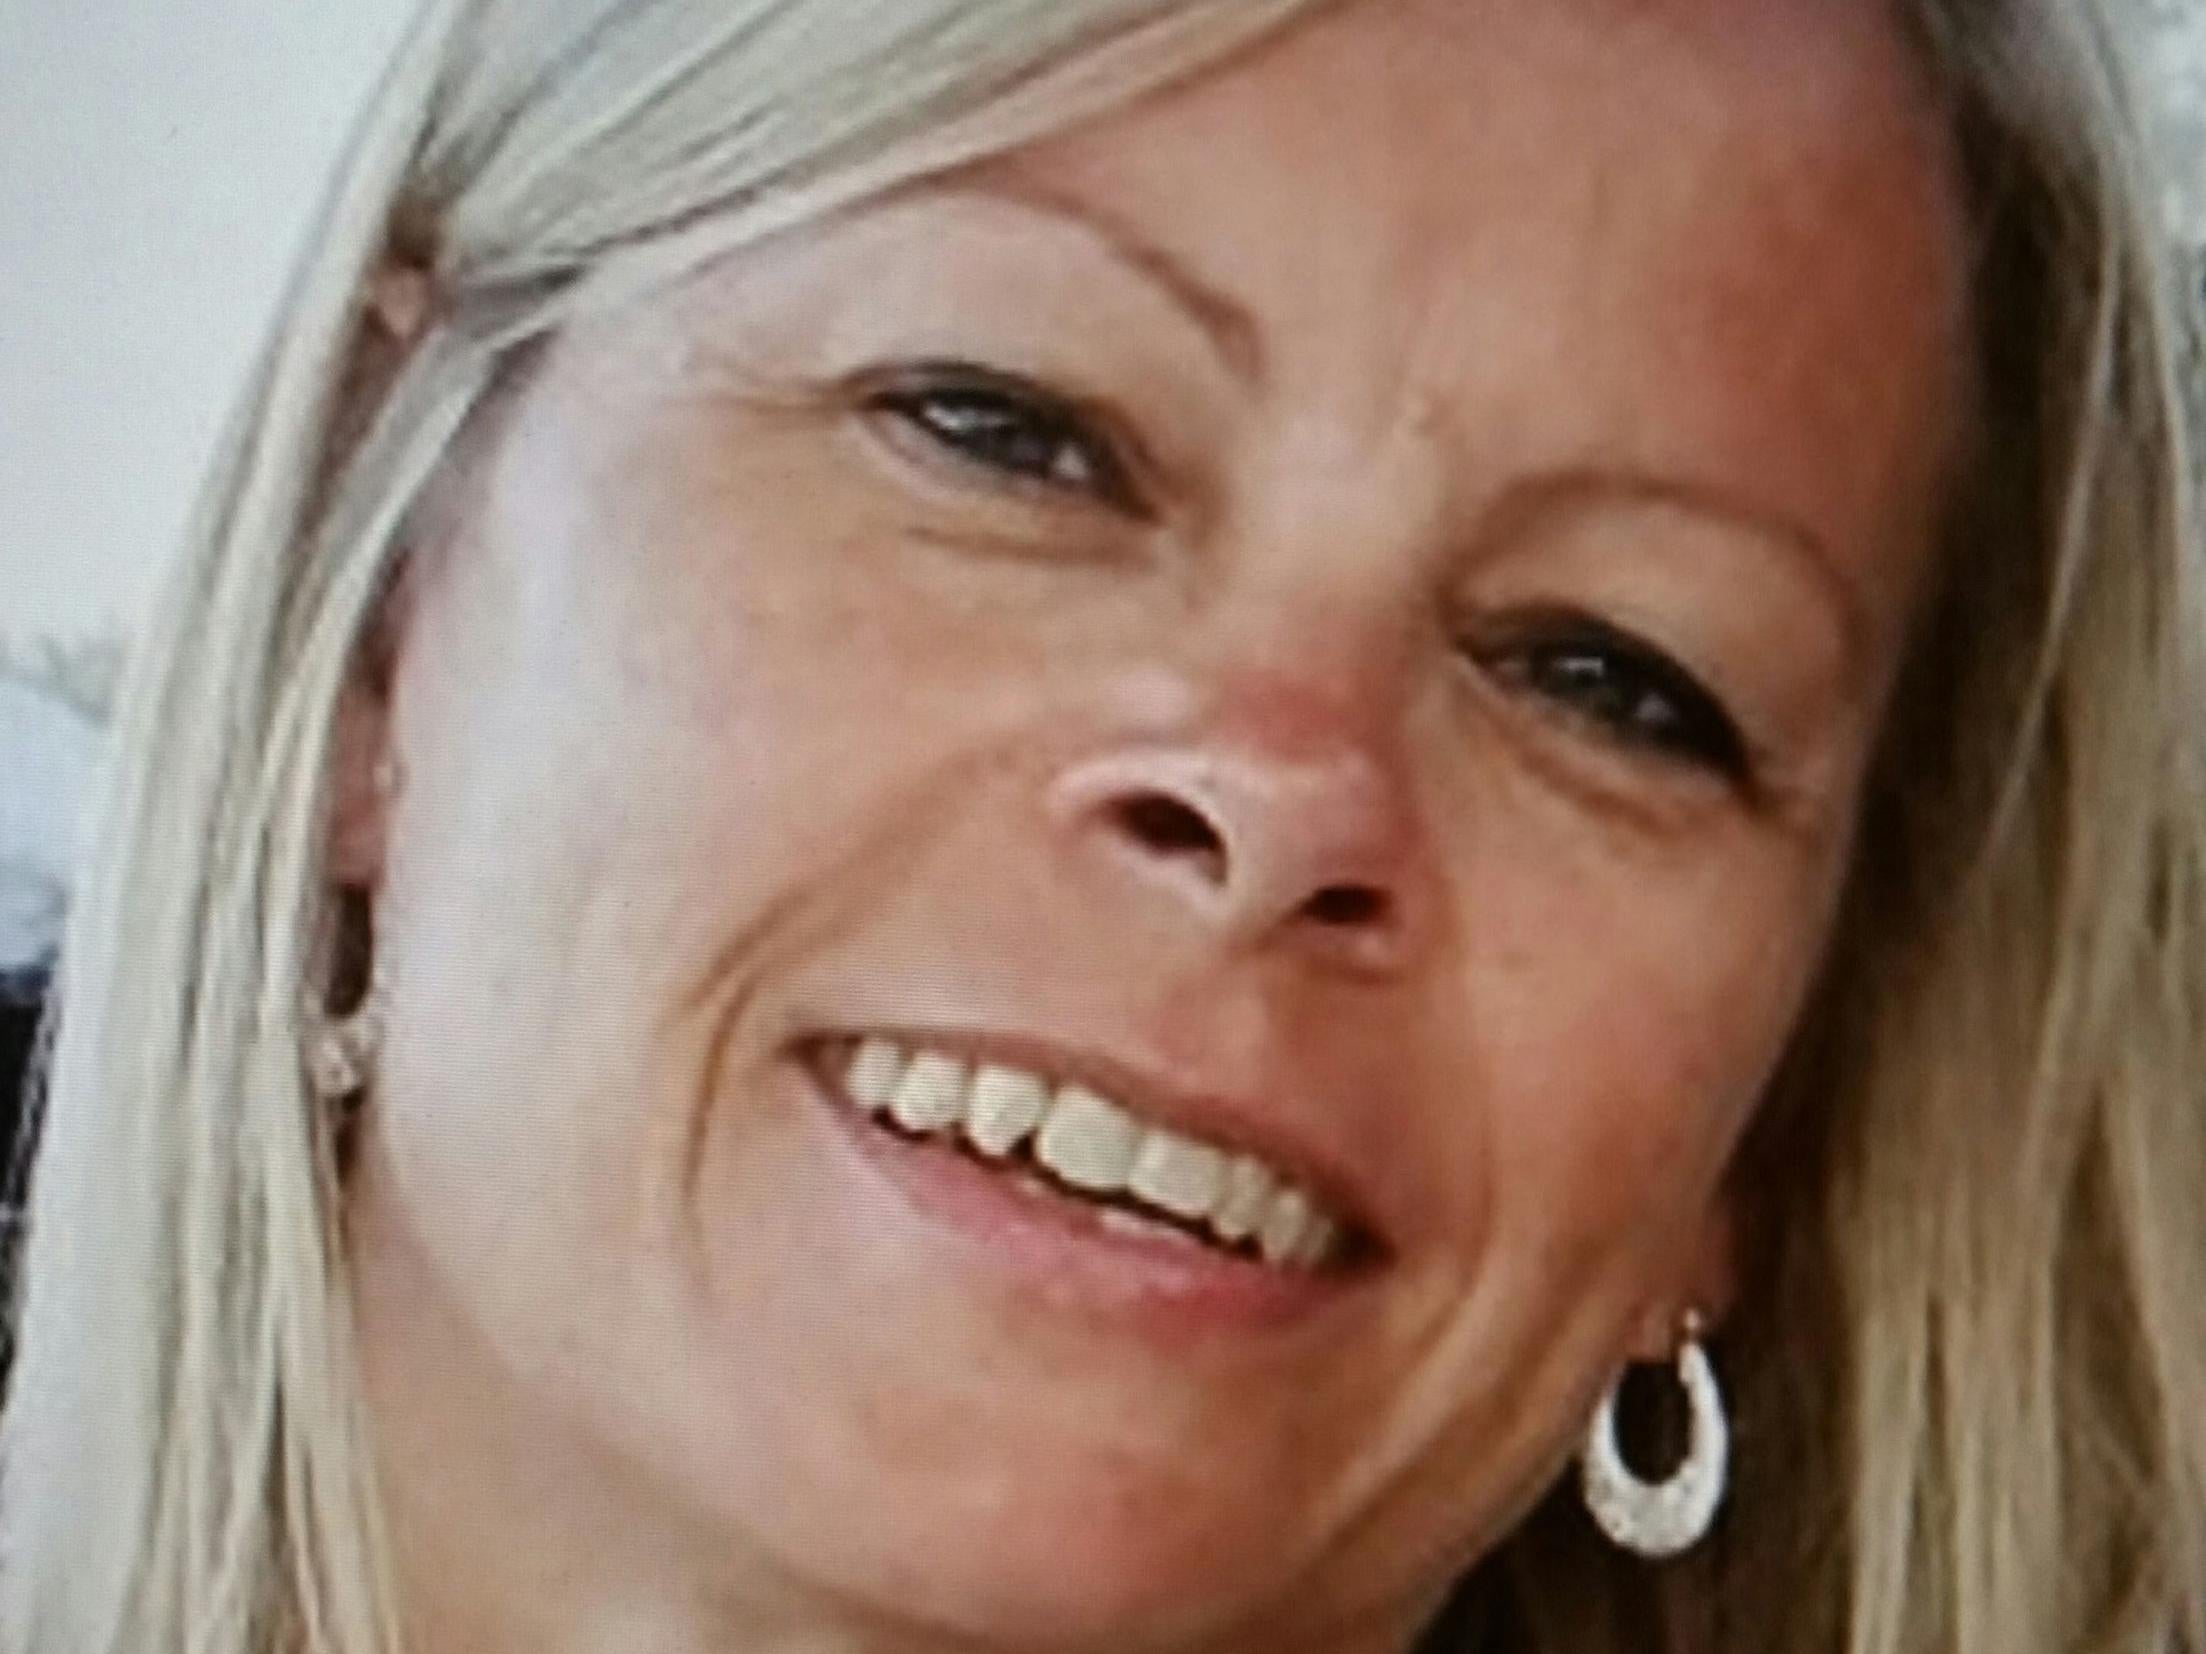 'Tina was a much-loved and well-respected colleague who will be sorely missed,' her company said